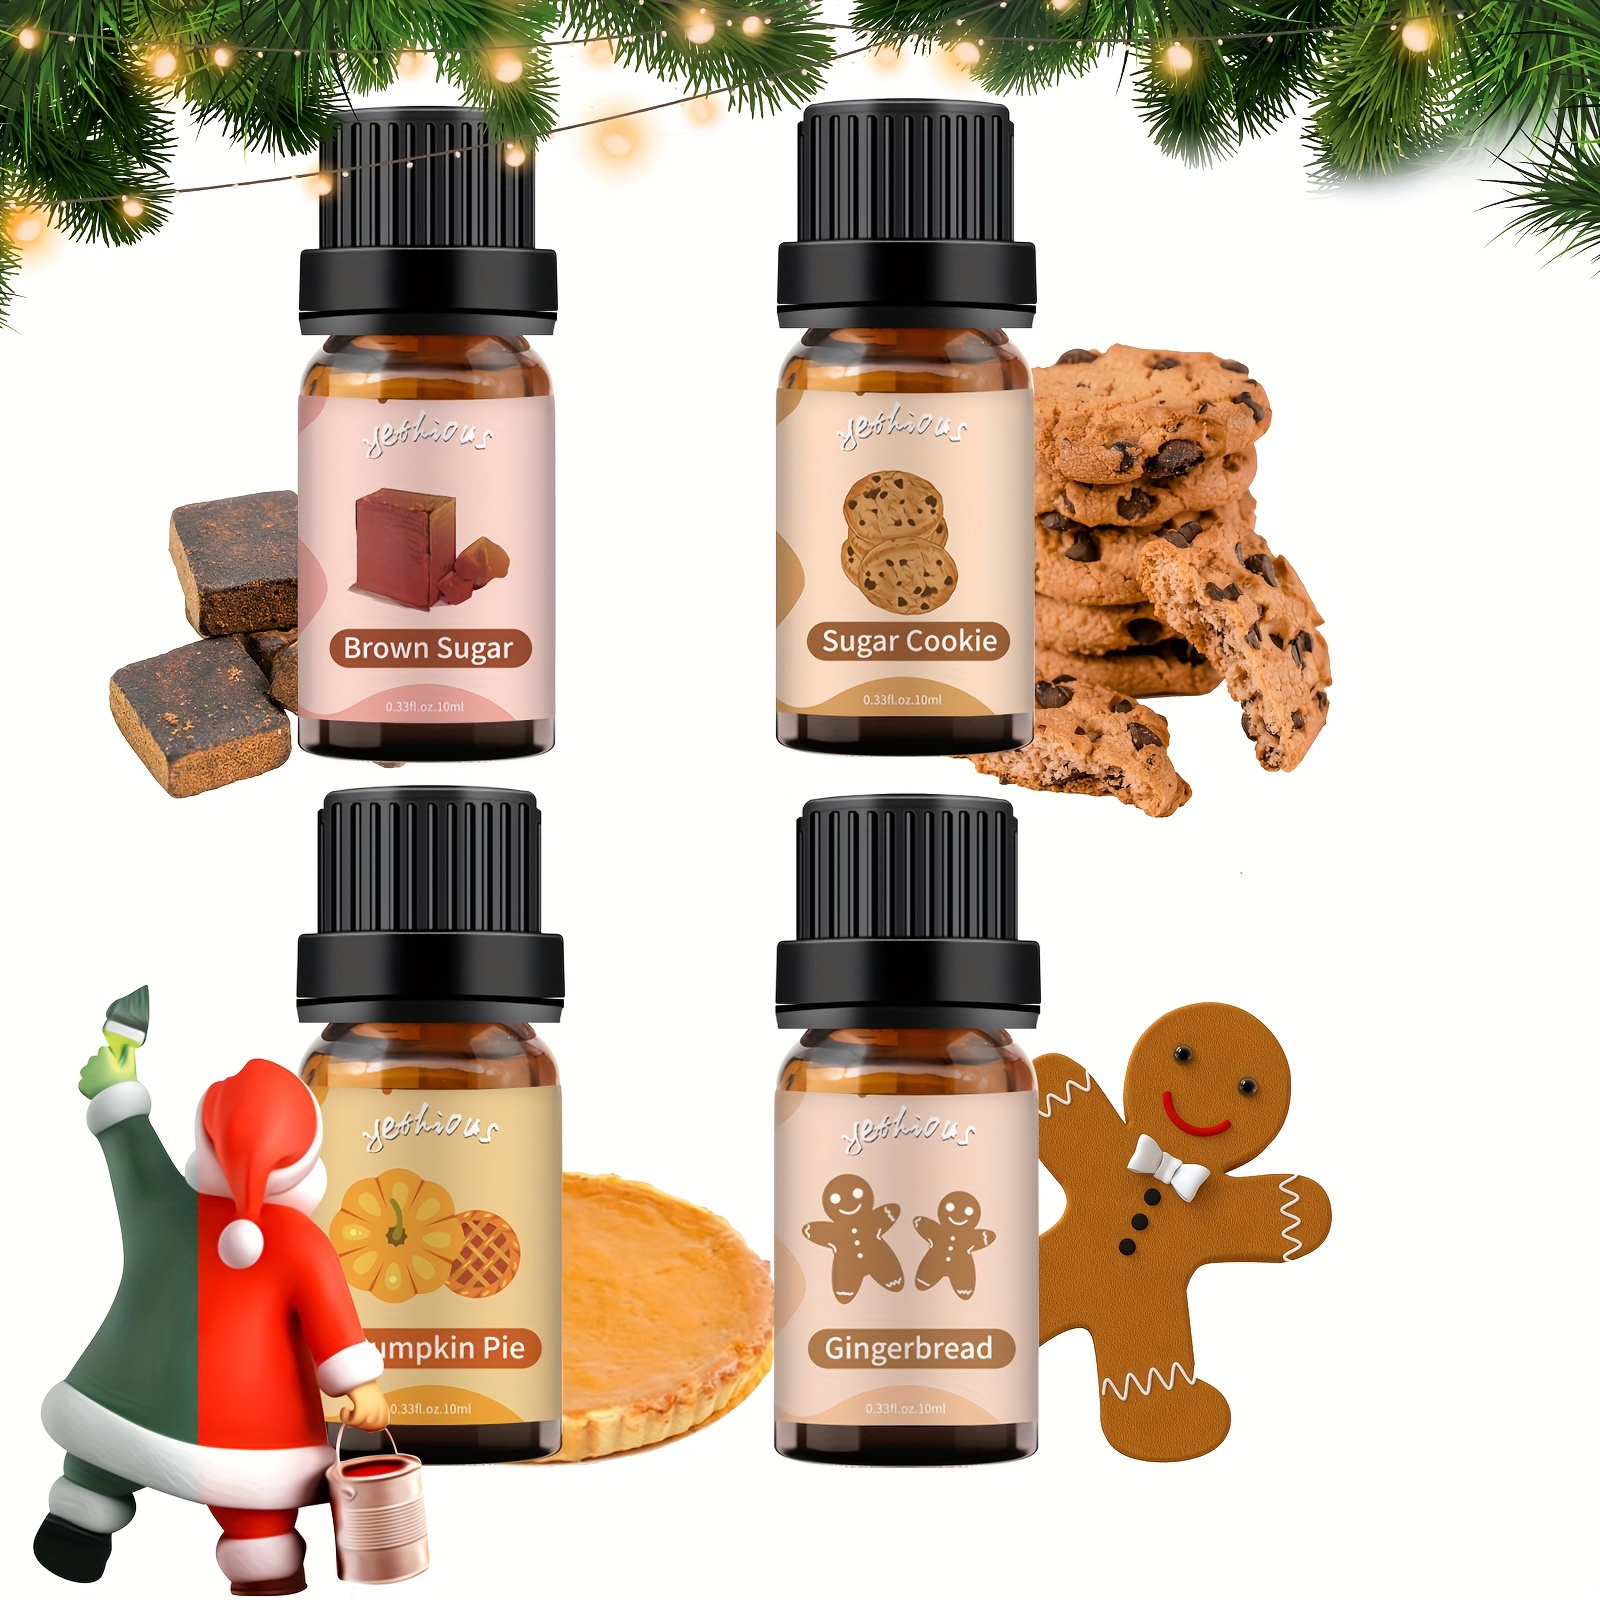 6pcs 10ml/0.33fl.Oz Fragrance Essential Oils Set For Diffusers Humidifier,  Sandalwood, Harvest Spice, Gingerbread, Pumpkin Pie, Bay Rum, Snickerdoodle